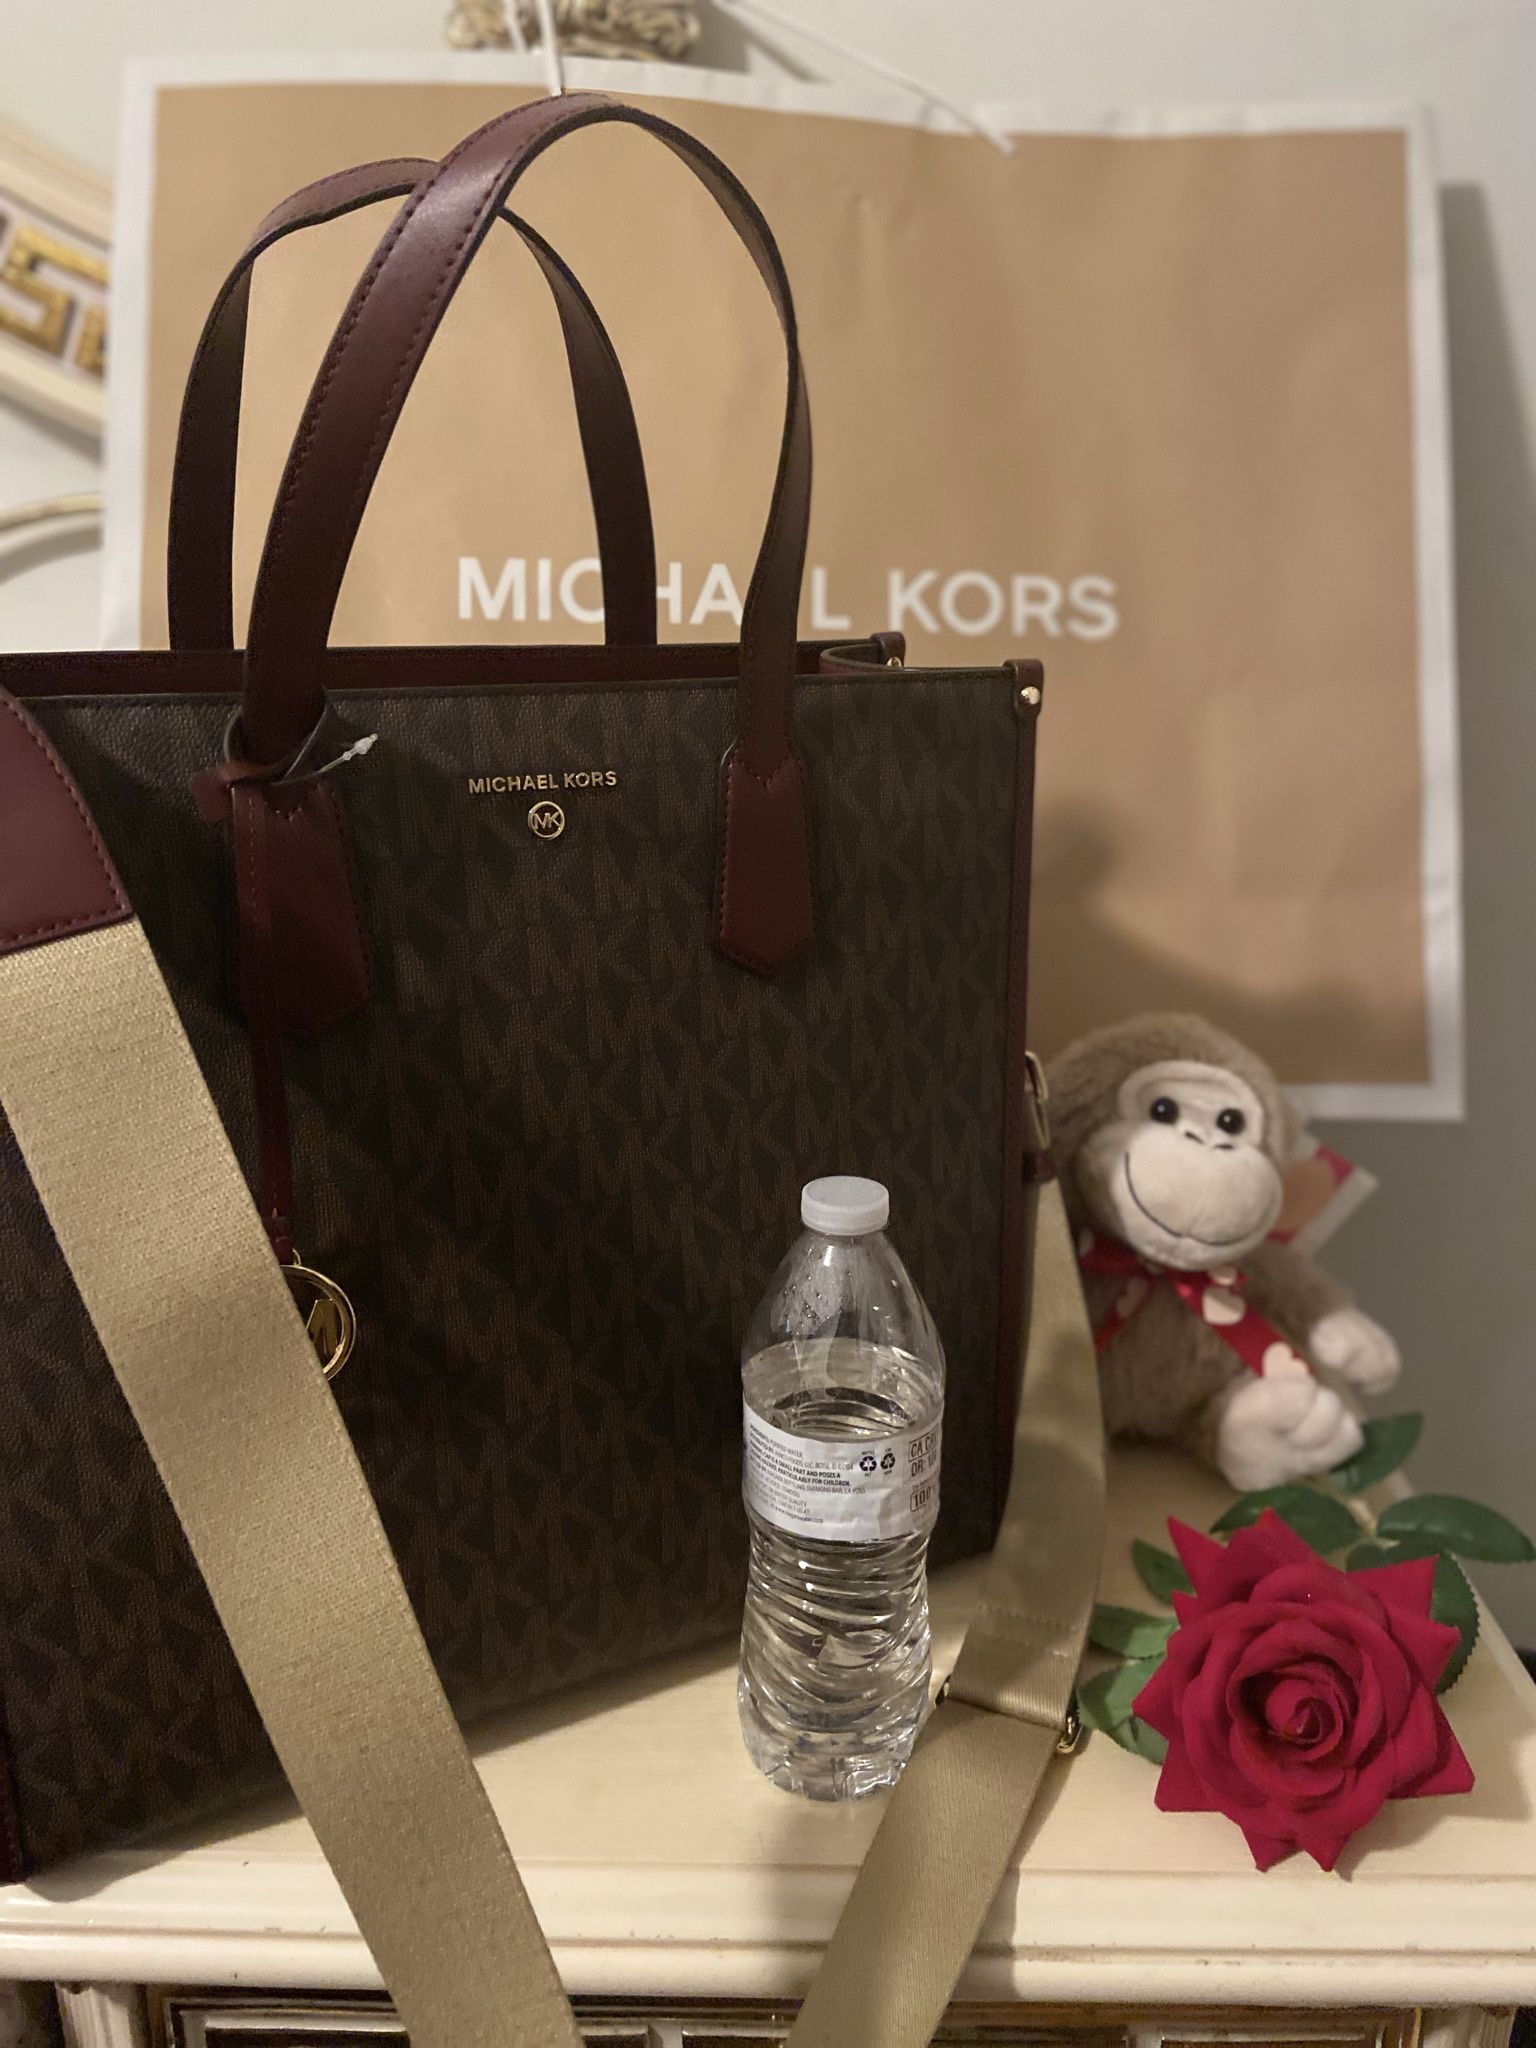 Michael Kors Black Jet Set Large Saffiano Leather Tote for Sale in Long  Beach, CA - OfferUp